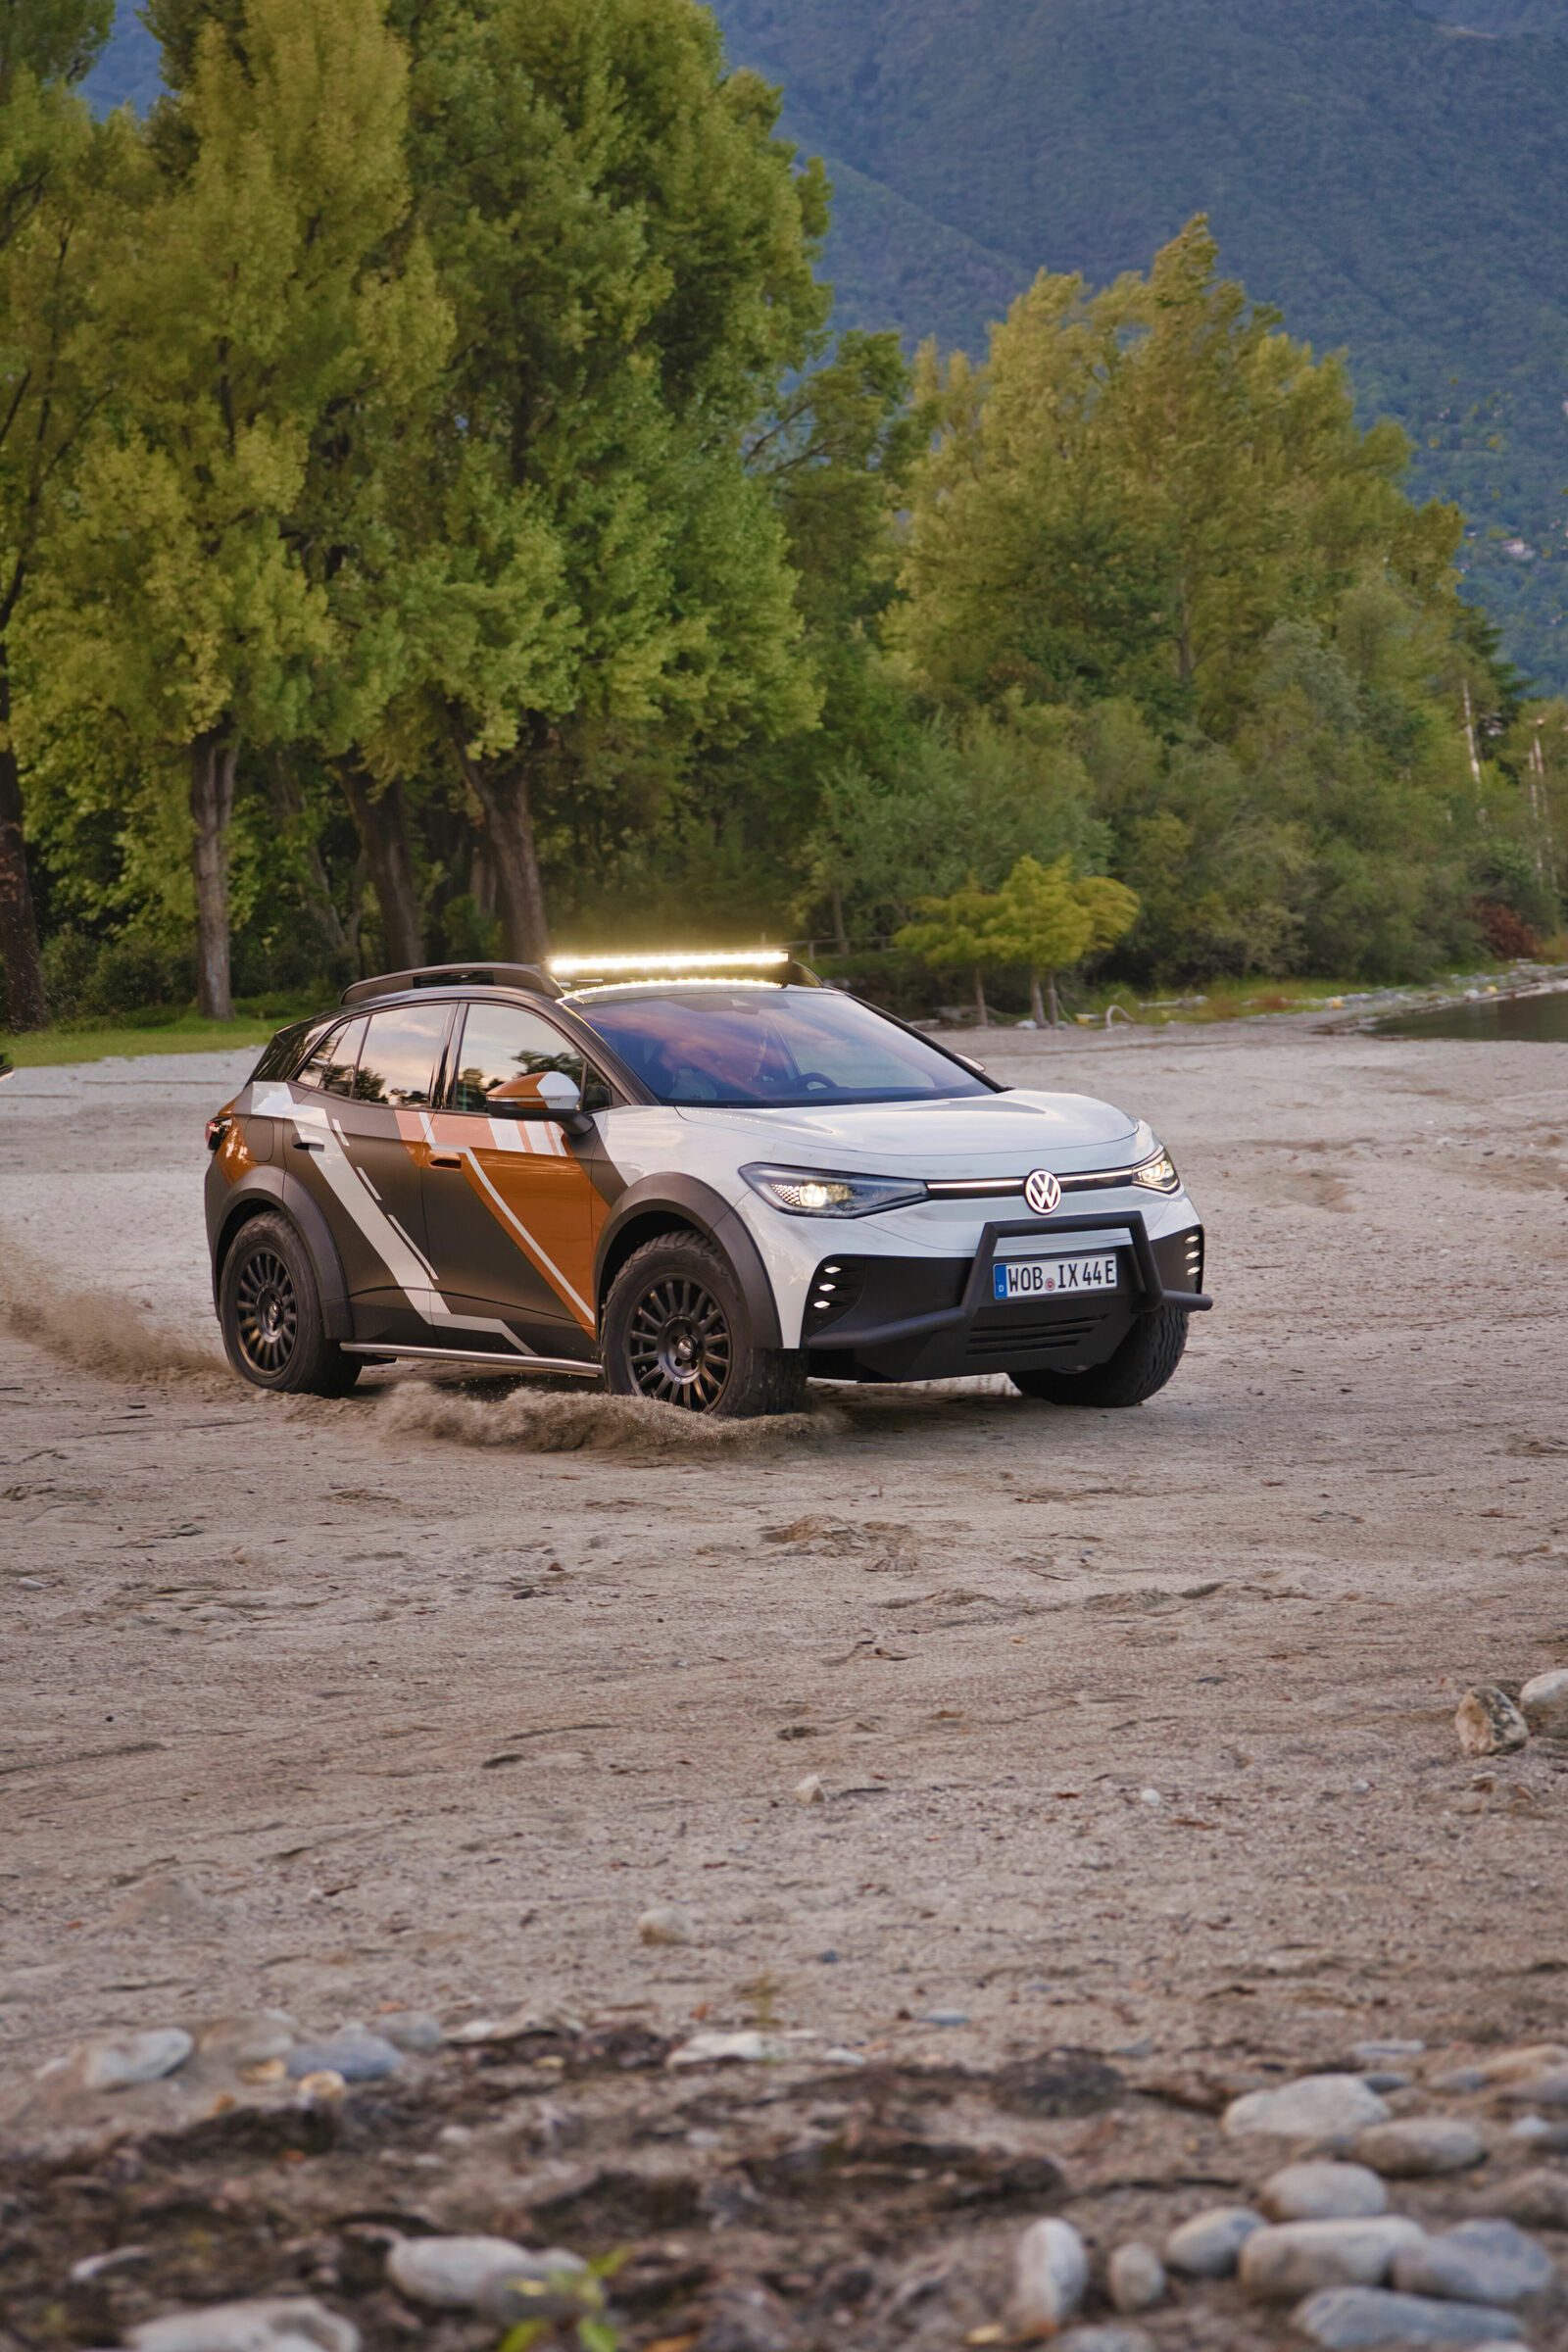 Volkswagen ID. XTREME off-road concept car